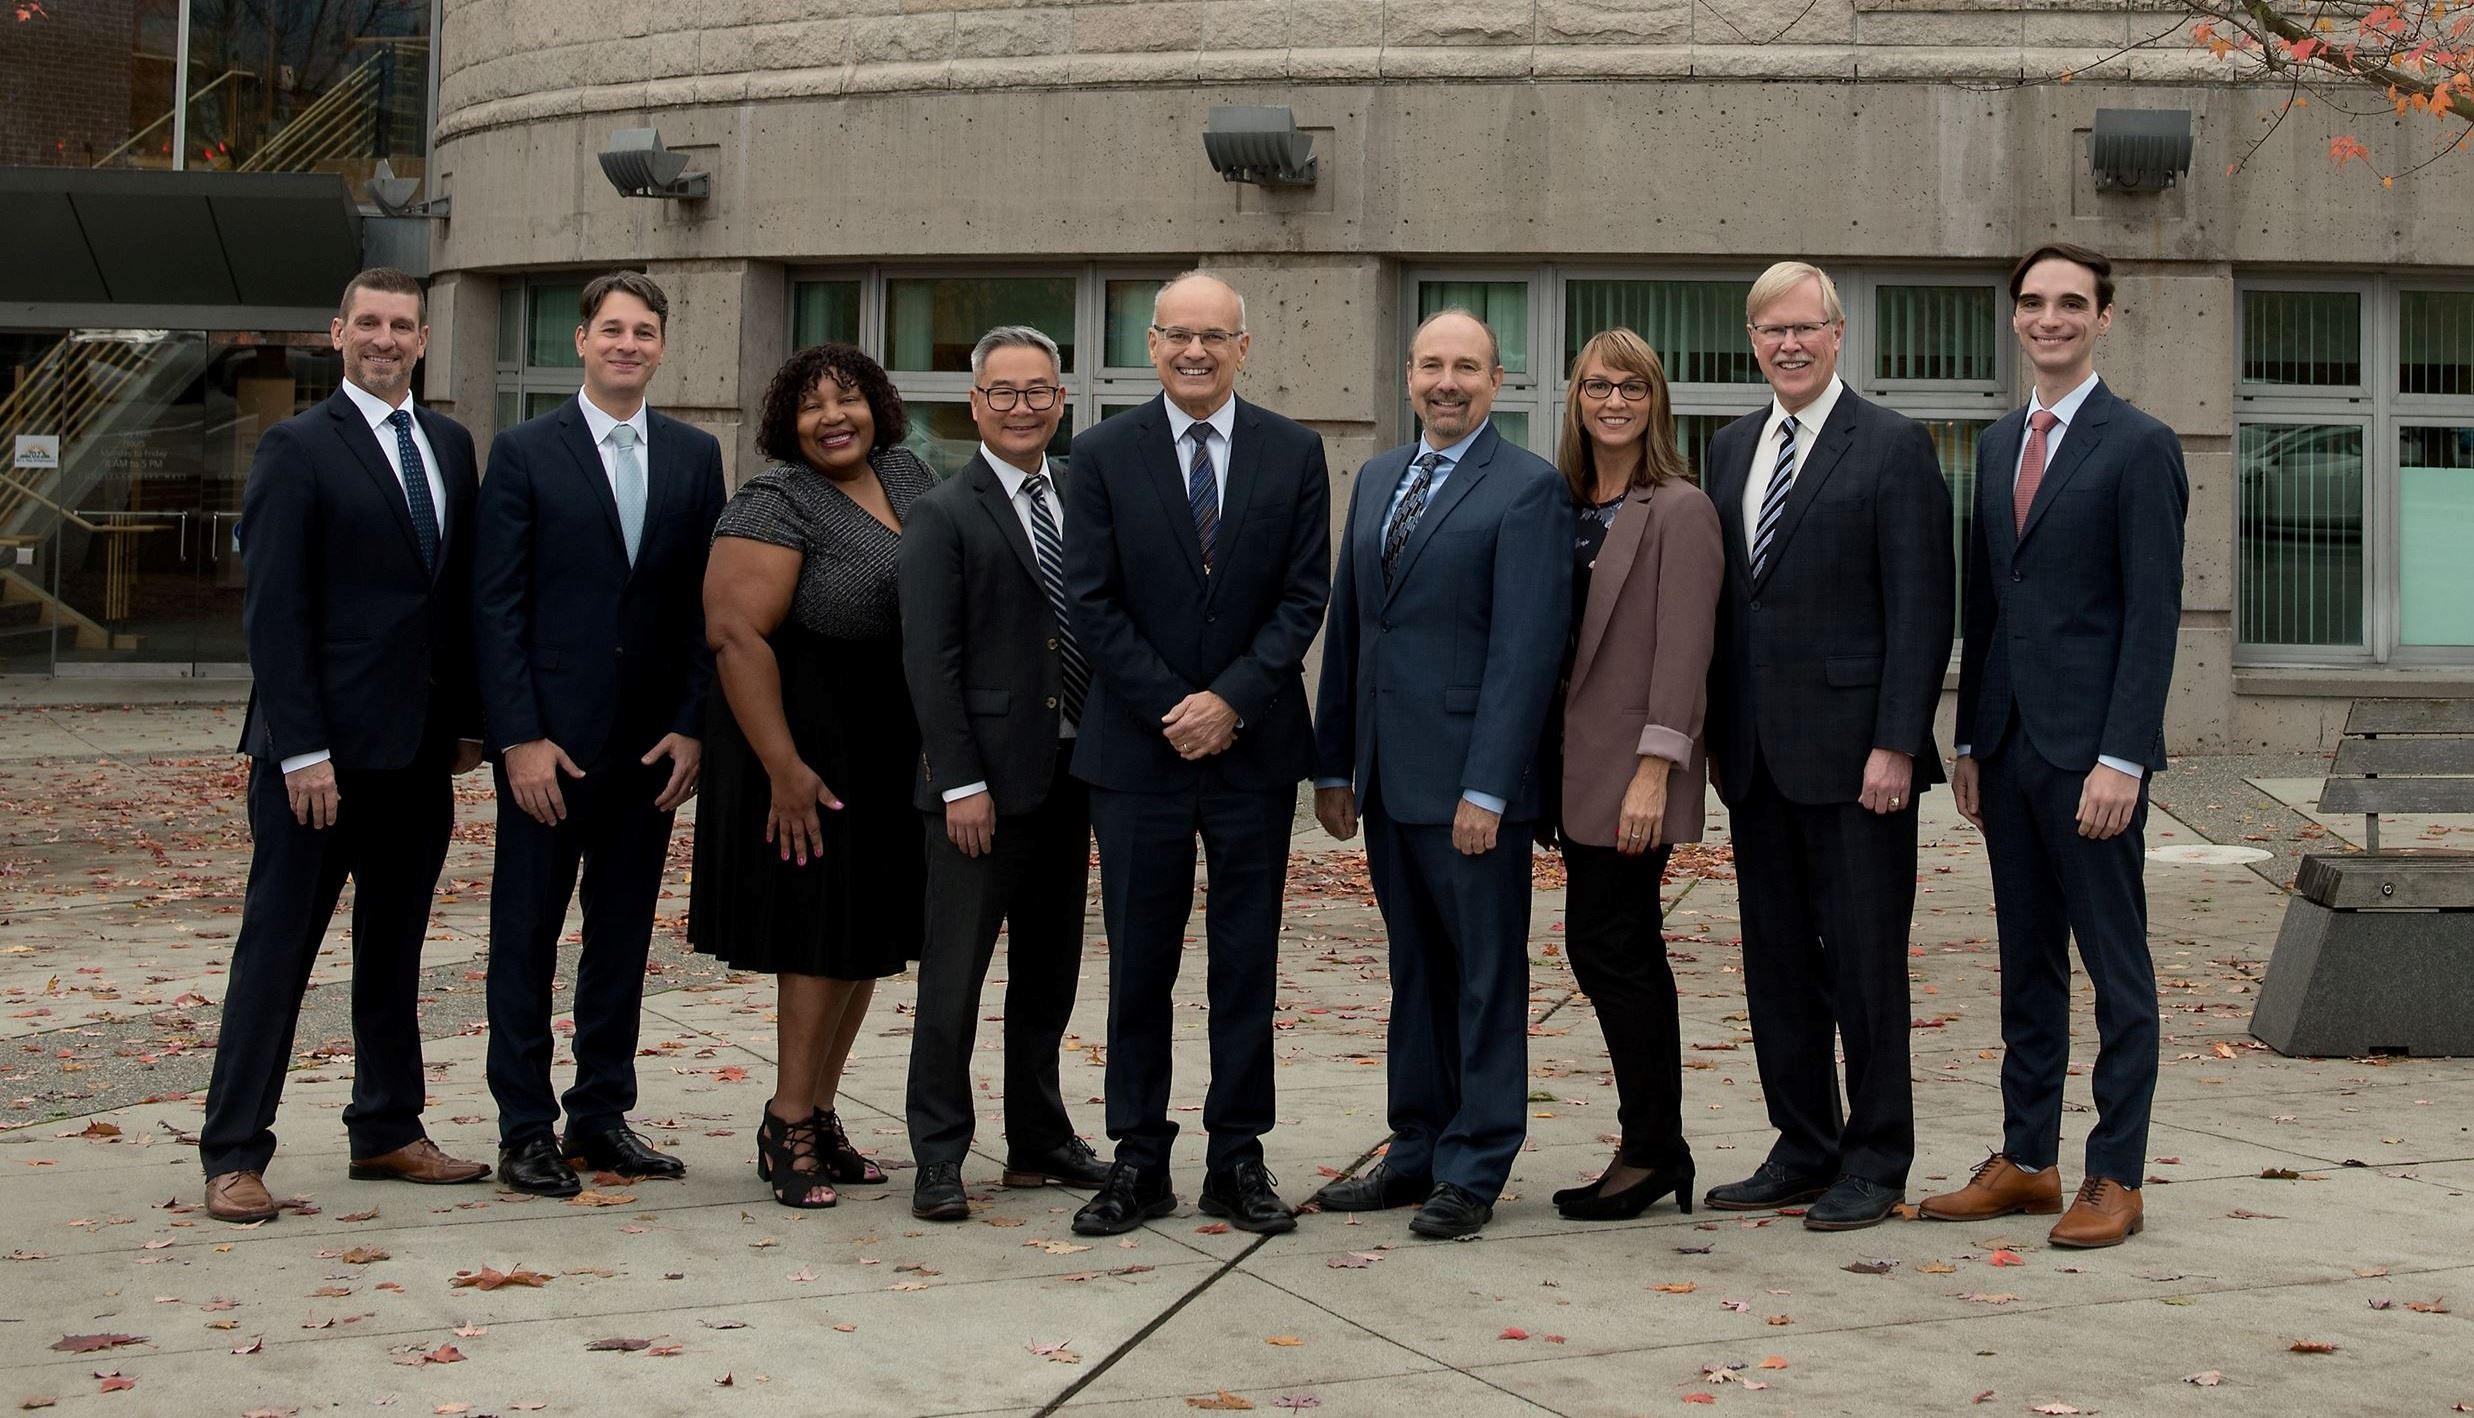 Group photo of Mayor and Councillors standing outside of City Hall, dressed sharply.